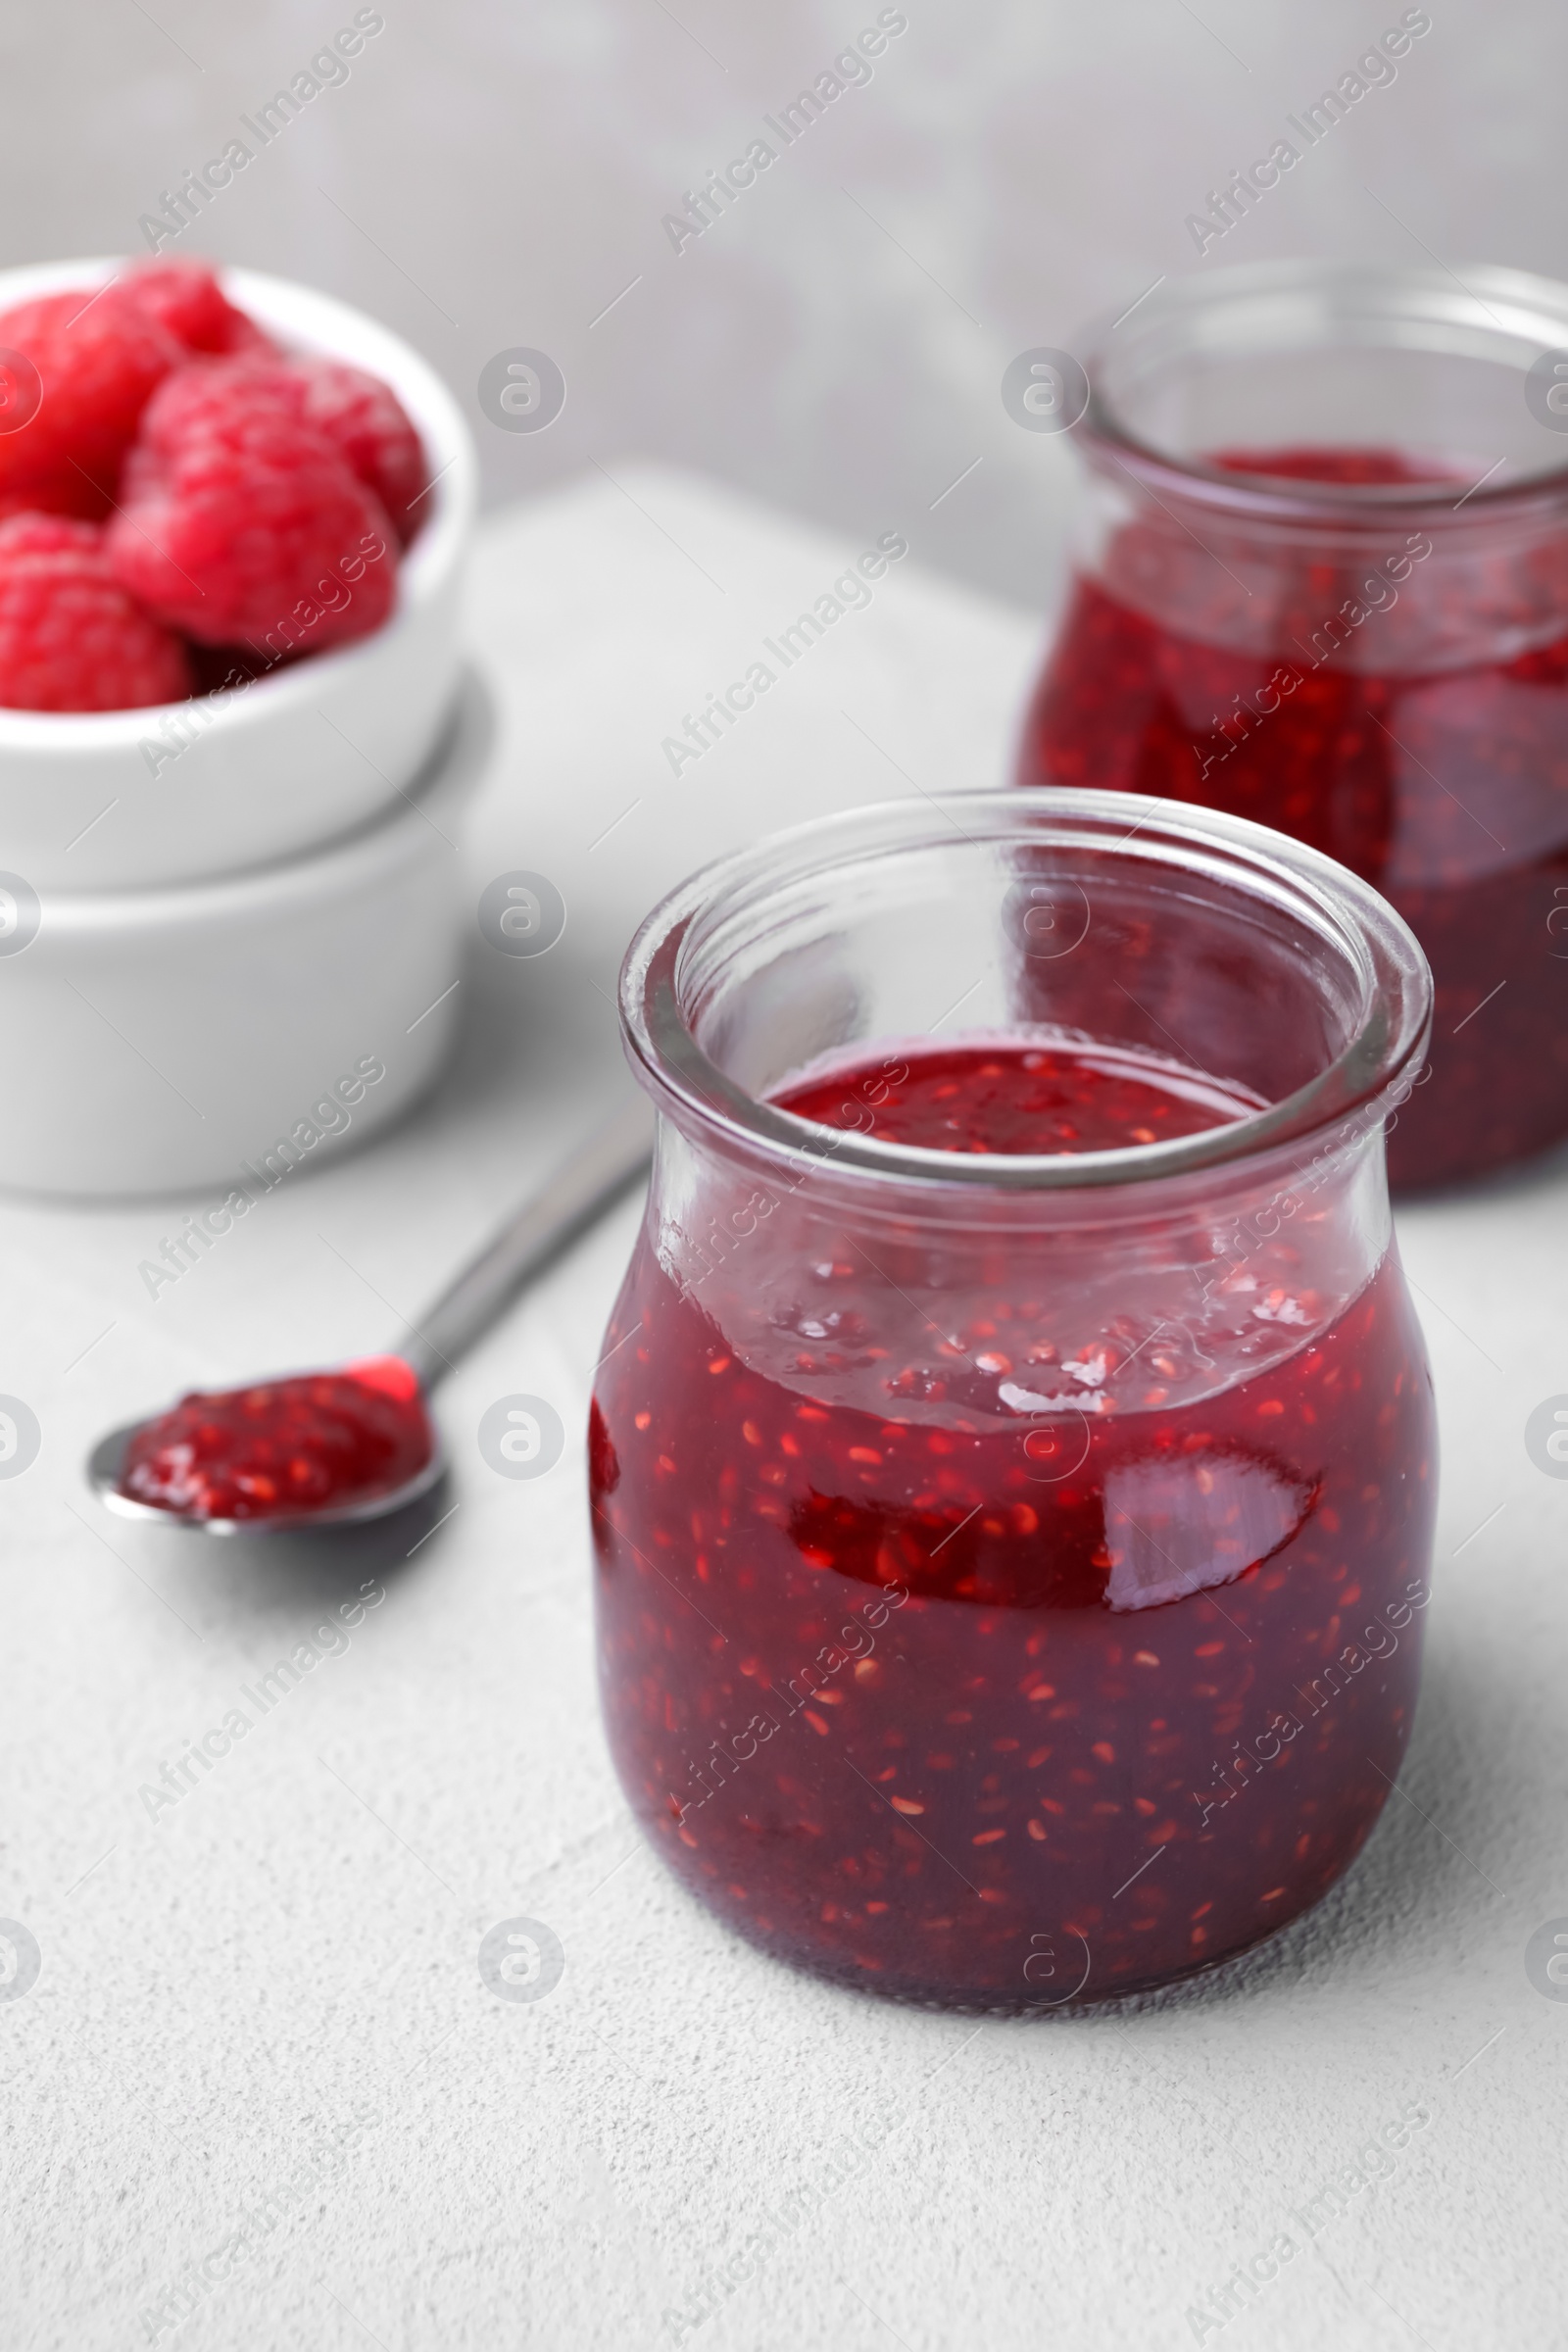 Photo of Delicious jam and fresh raspberries on light table